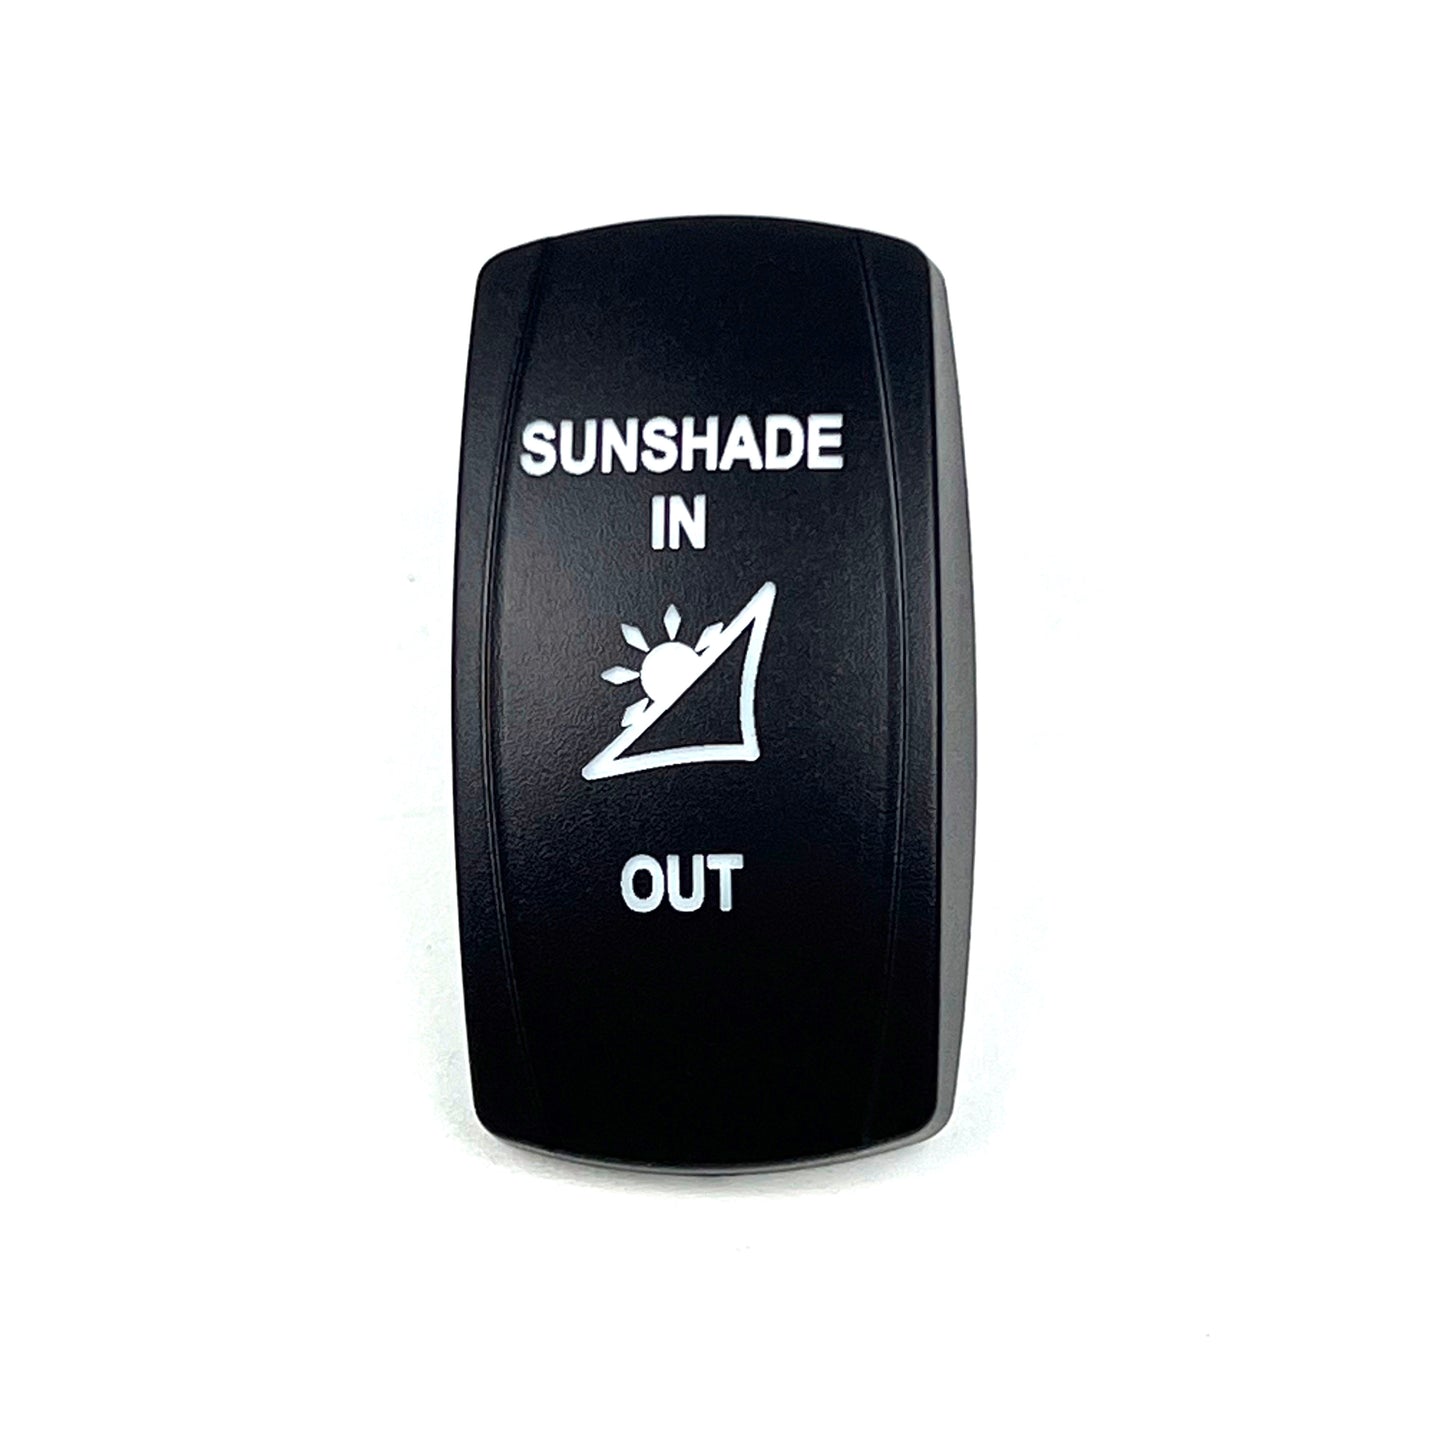 C5 Engraved Actuator/Cover (SUNSHADE IN OUT)